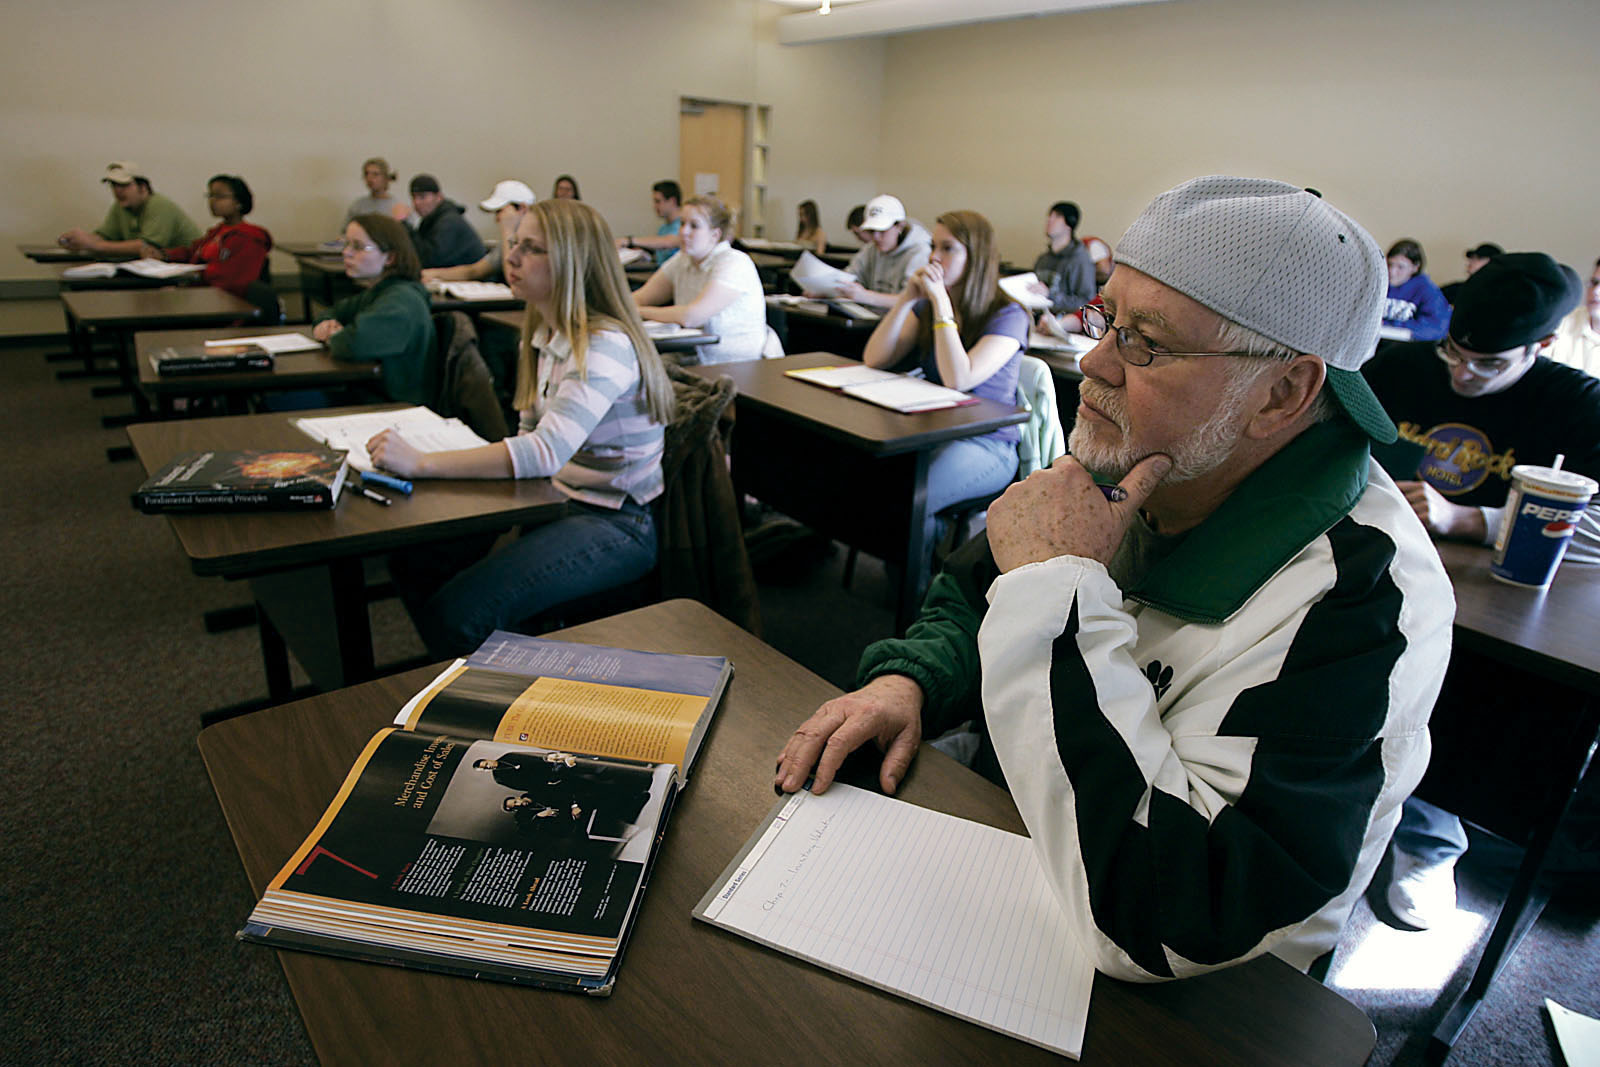 President Hubbard participated in a class session during a "President for a Day" contest in 2005.